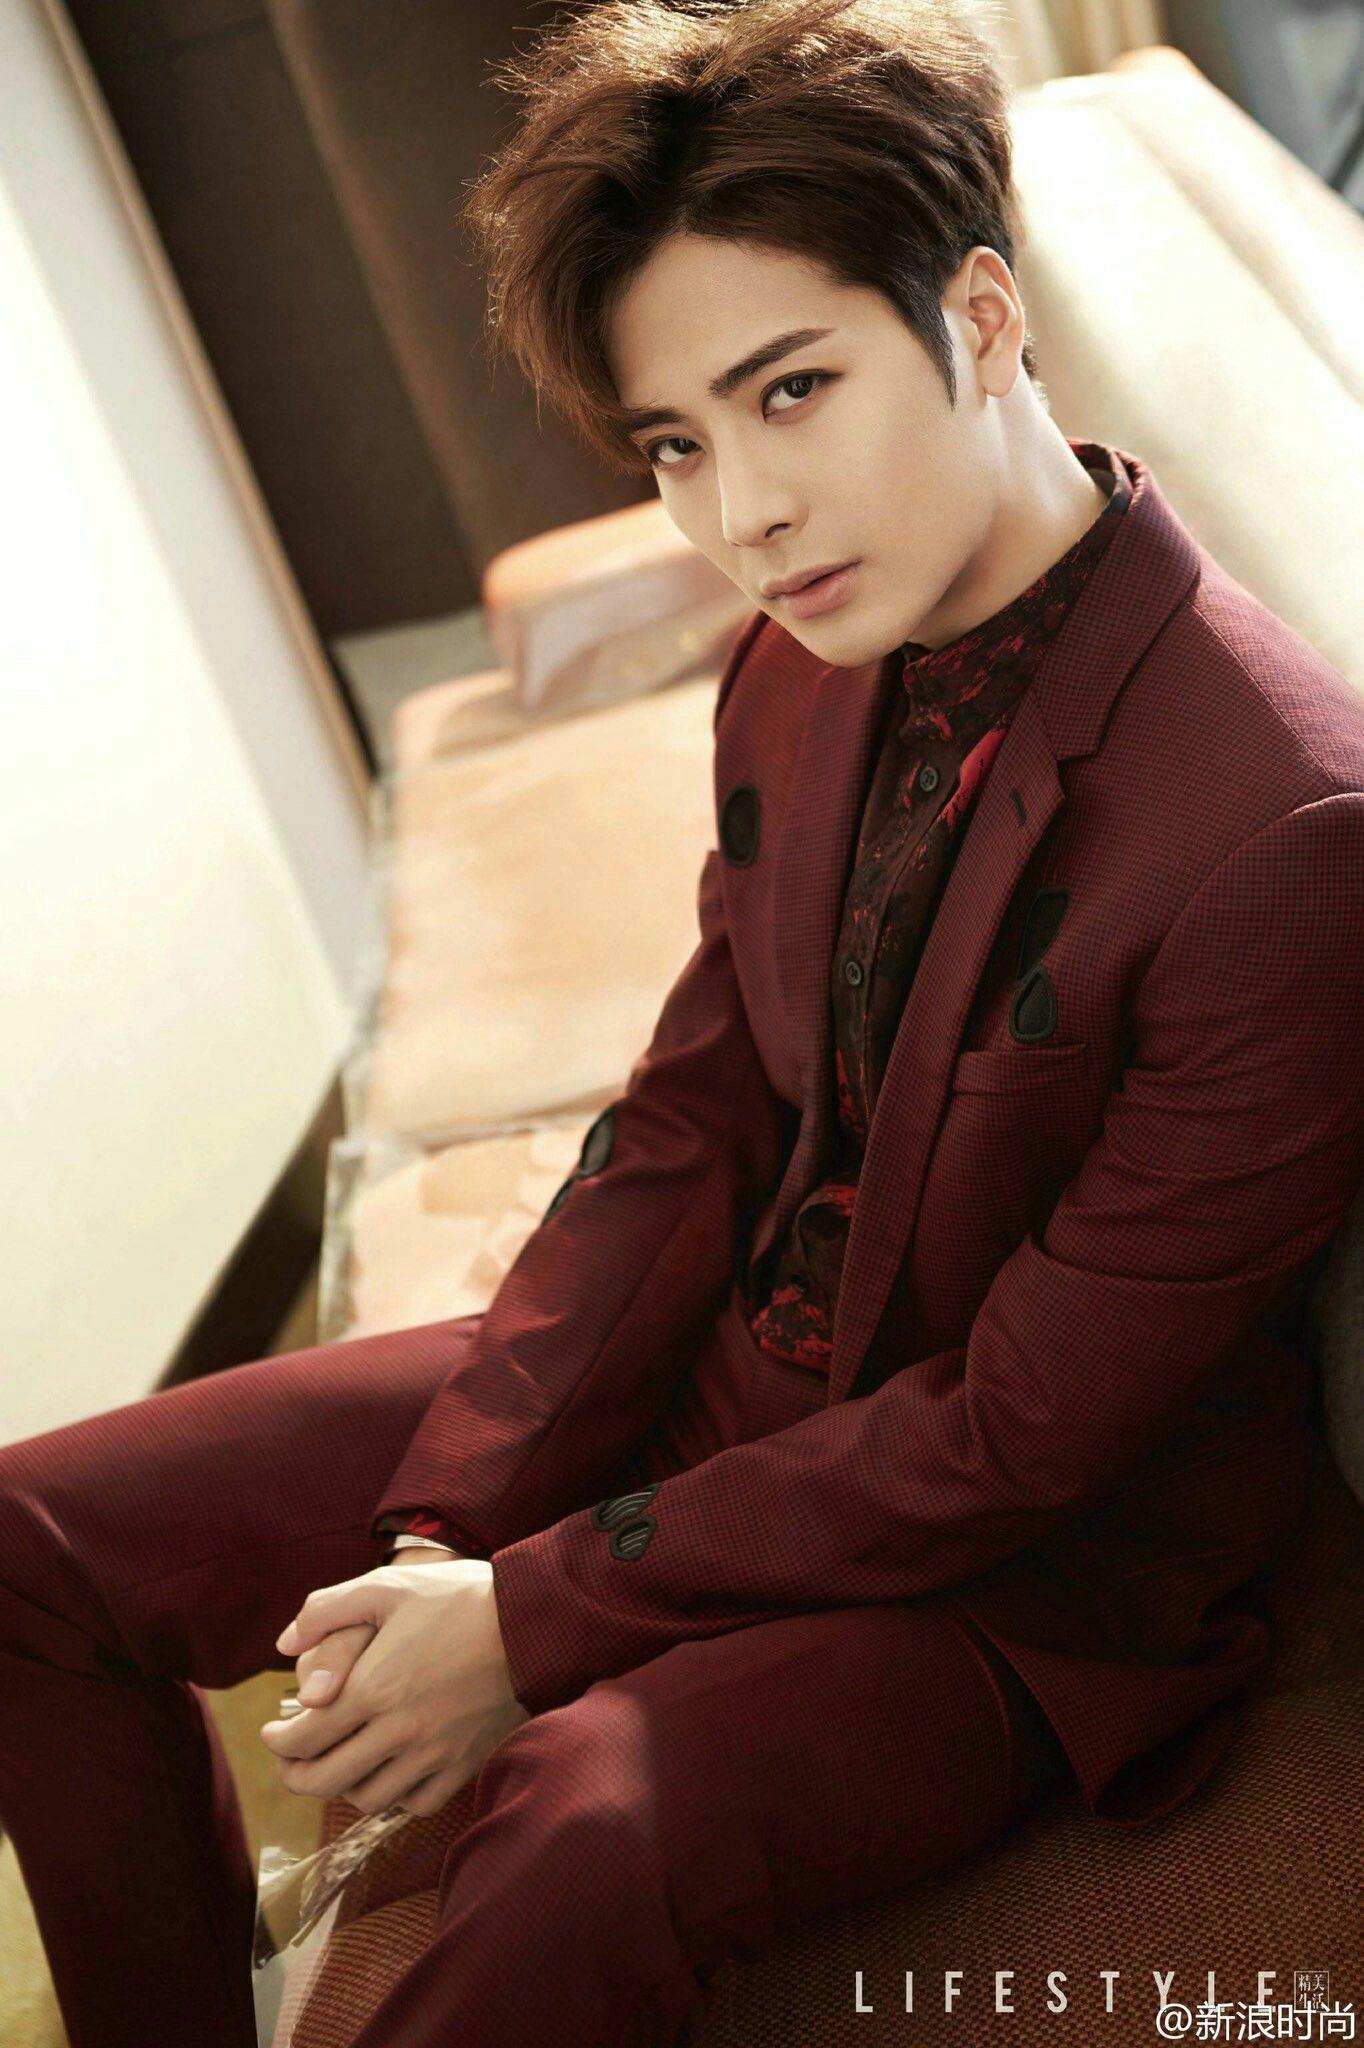 Download Jackson Wang With Cup Wallpaper